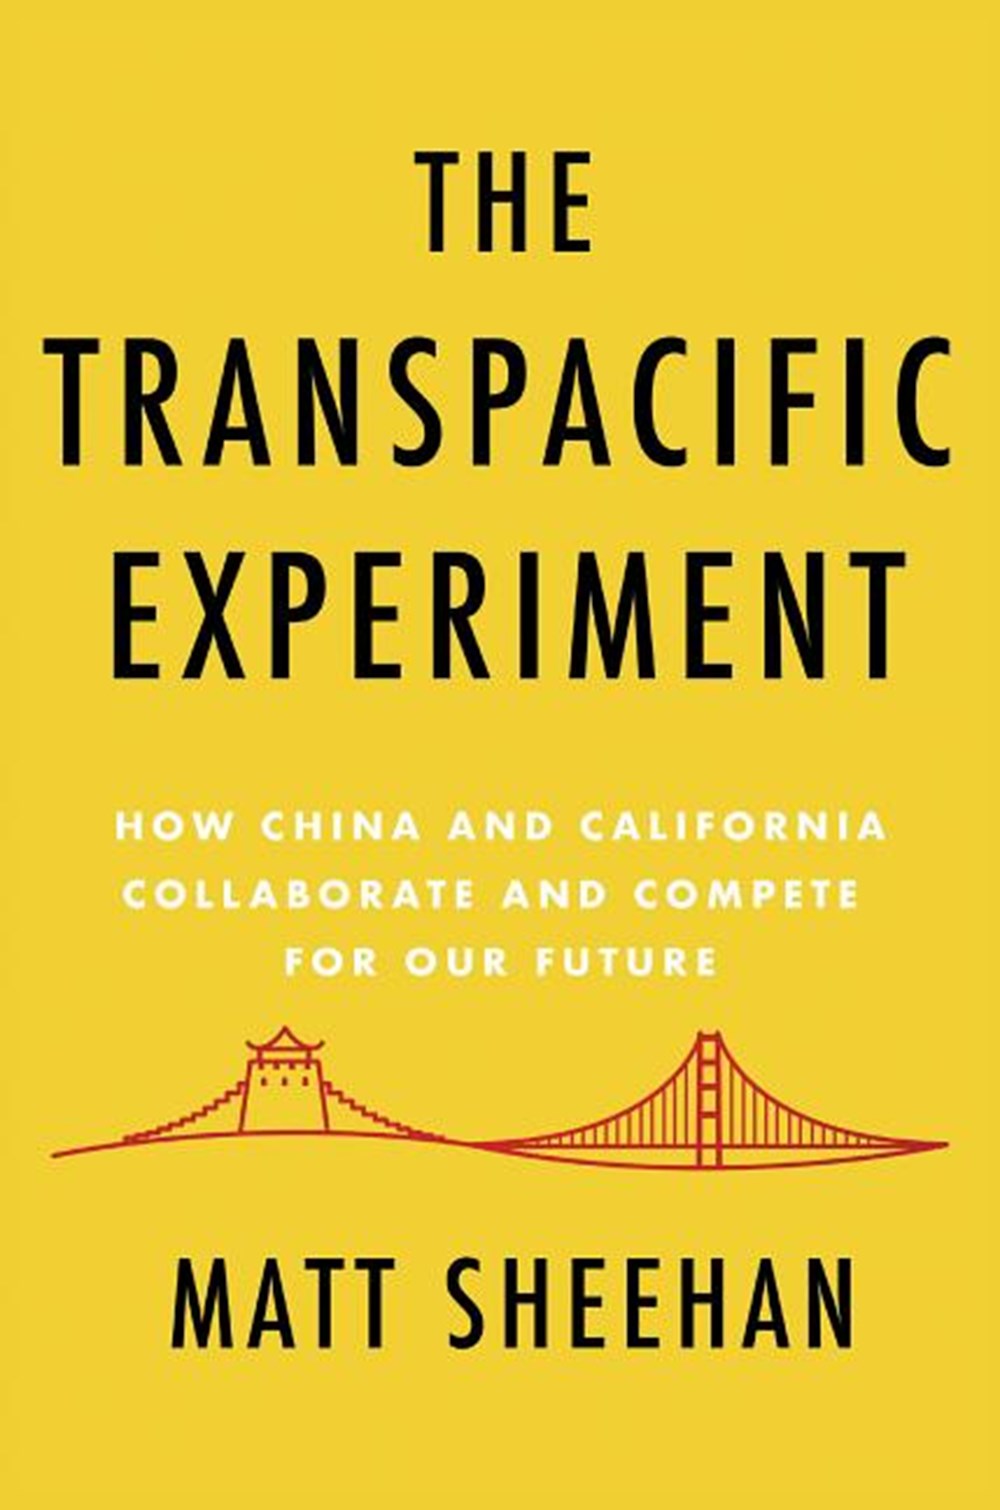 Transpacific Experiment How China and California Collaborate and Compete for Our Future